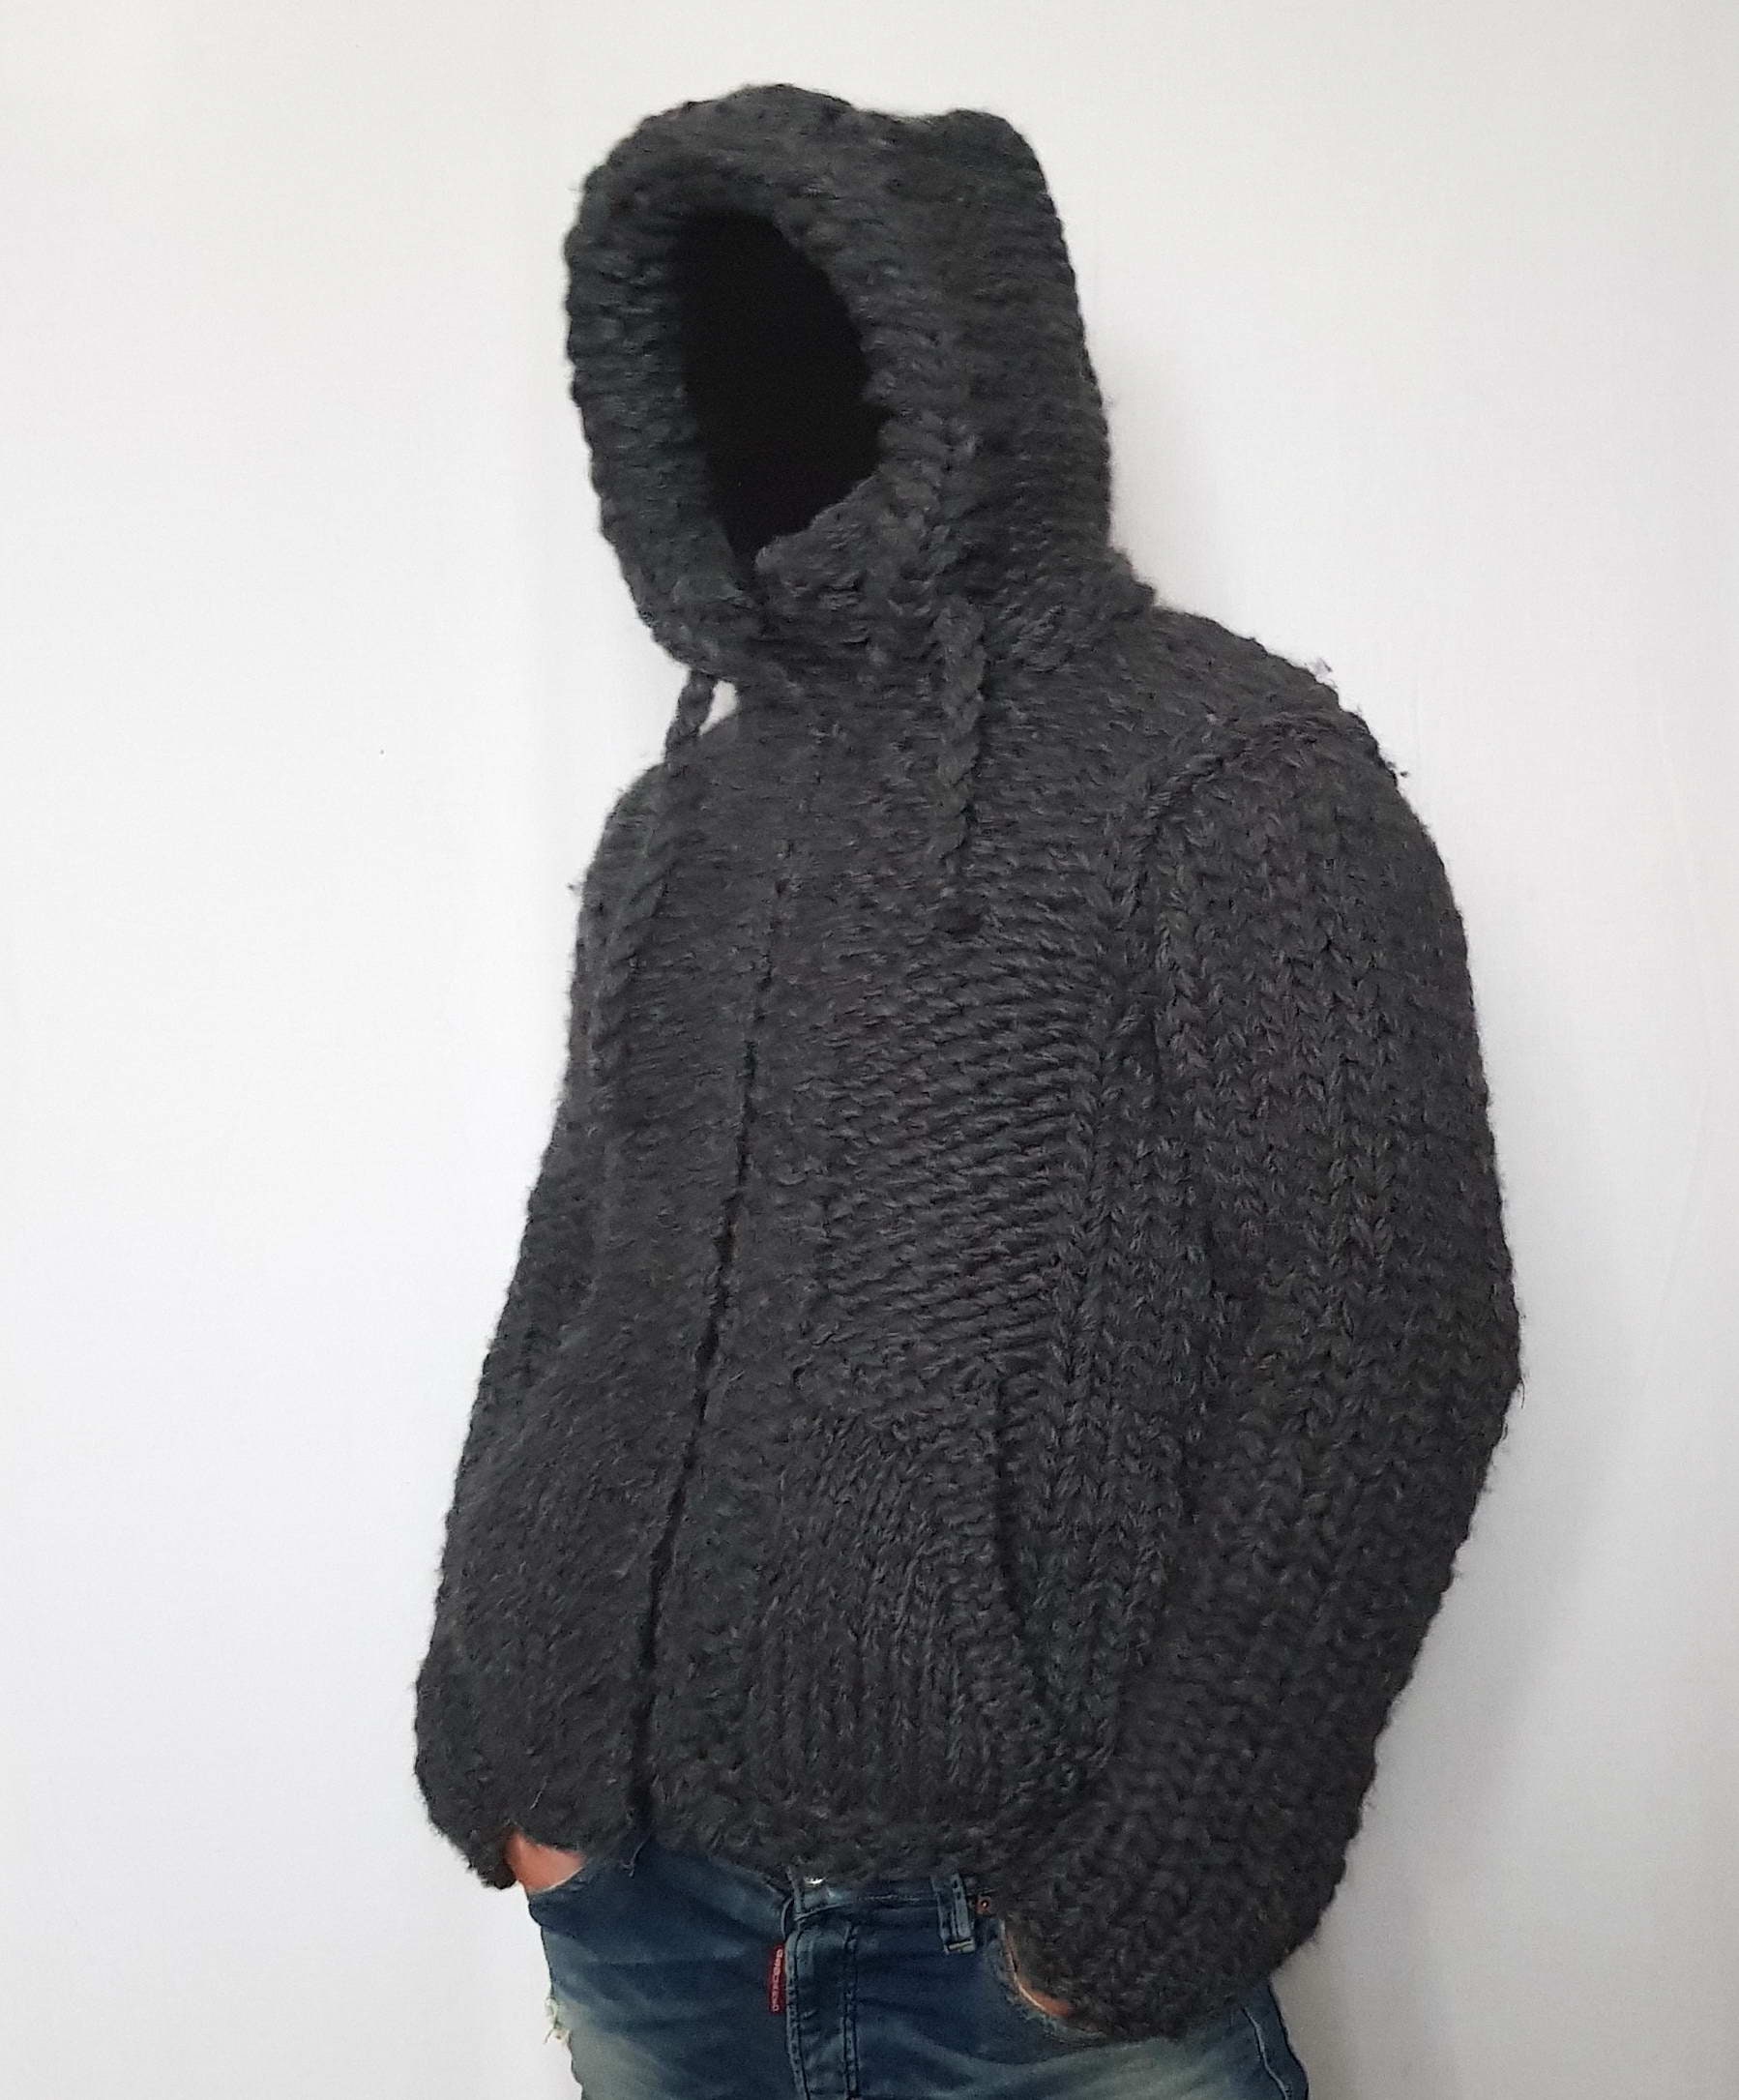 jacket Hand knitted VERY THICK  100% WOOL mens hoodie sweater with turtleneck zipper and pockets Clothing Mens Clothing Hoodies & Sweatshirts Hoodies woolen pullover hood soft Jumper 